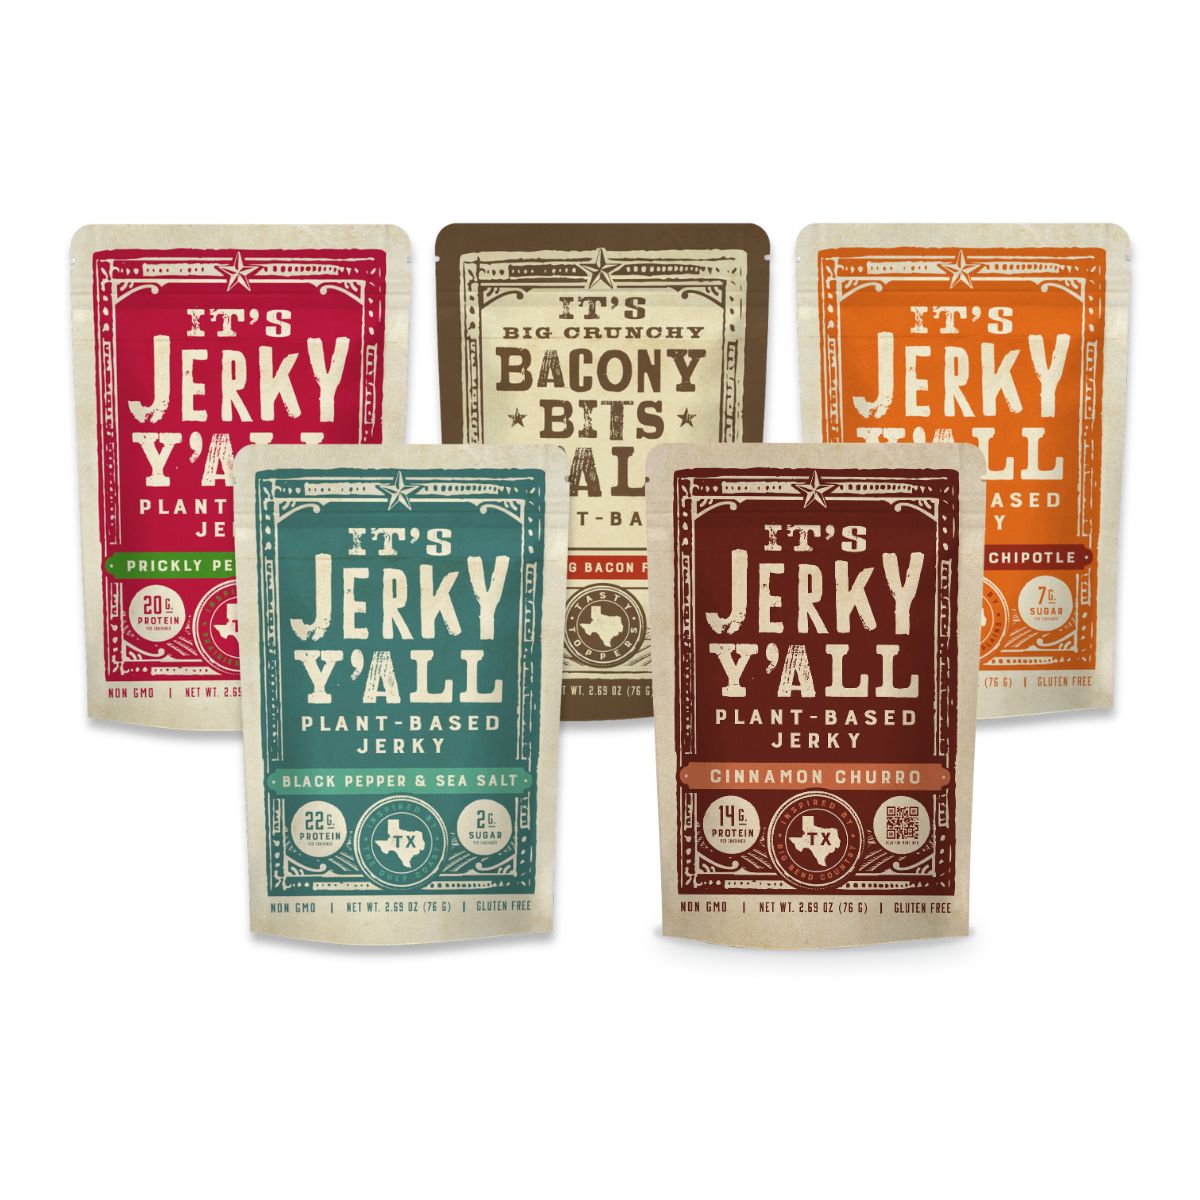 Five flavors on plant-based jerky and bacony bits, variety pack.